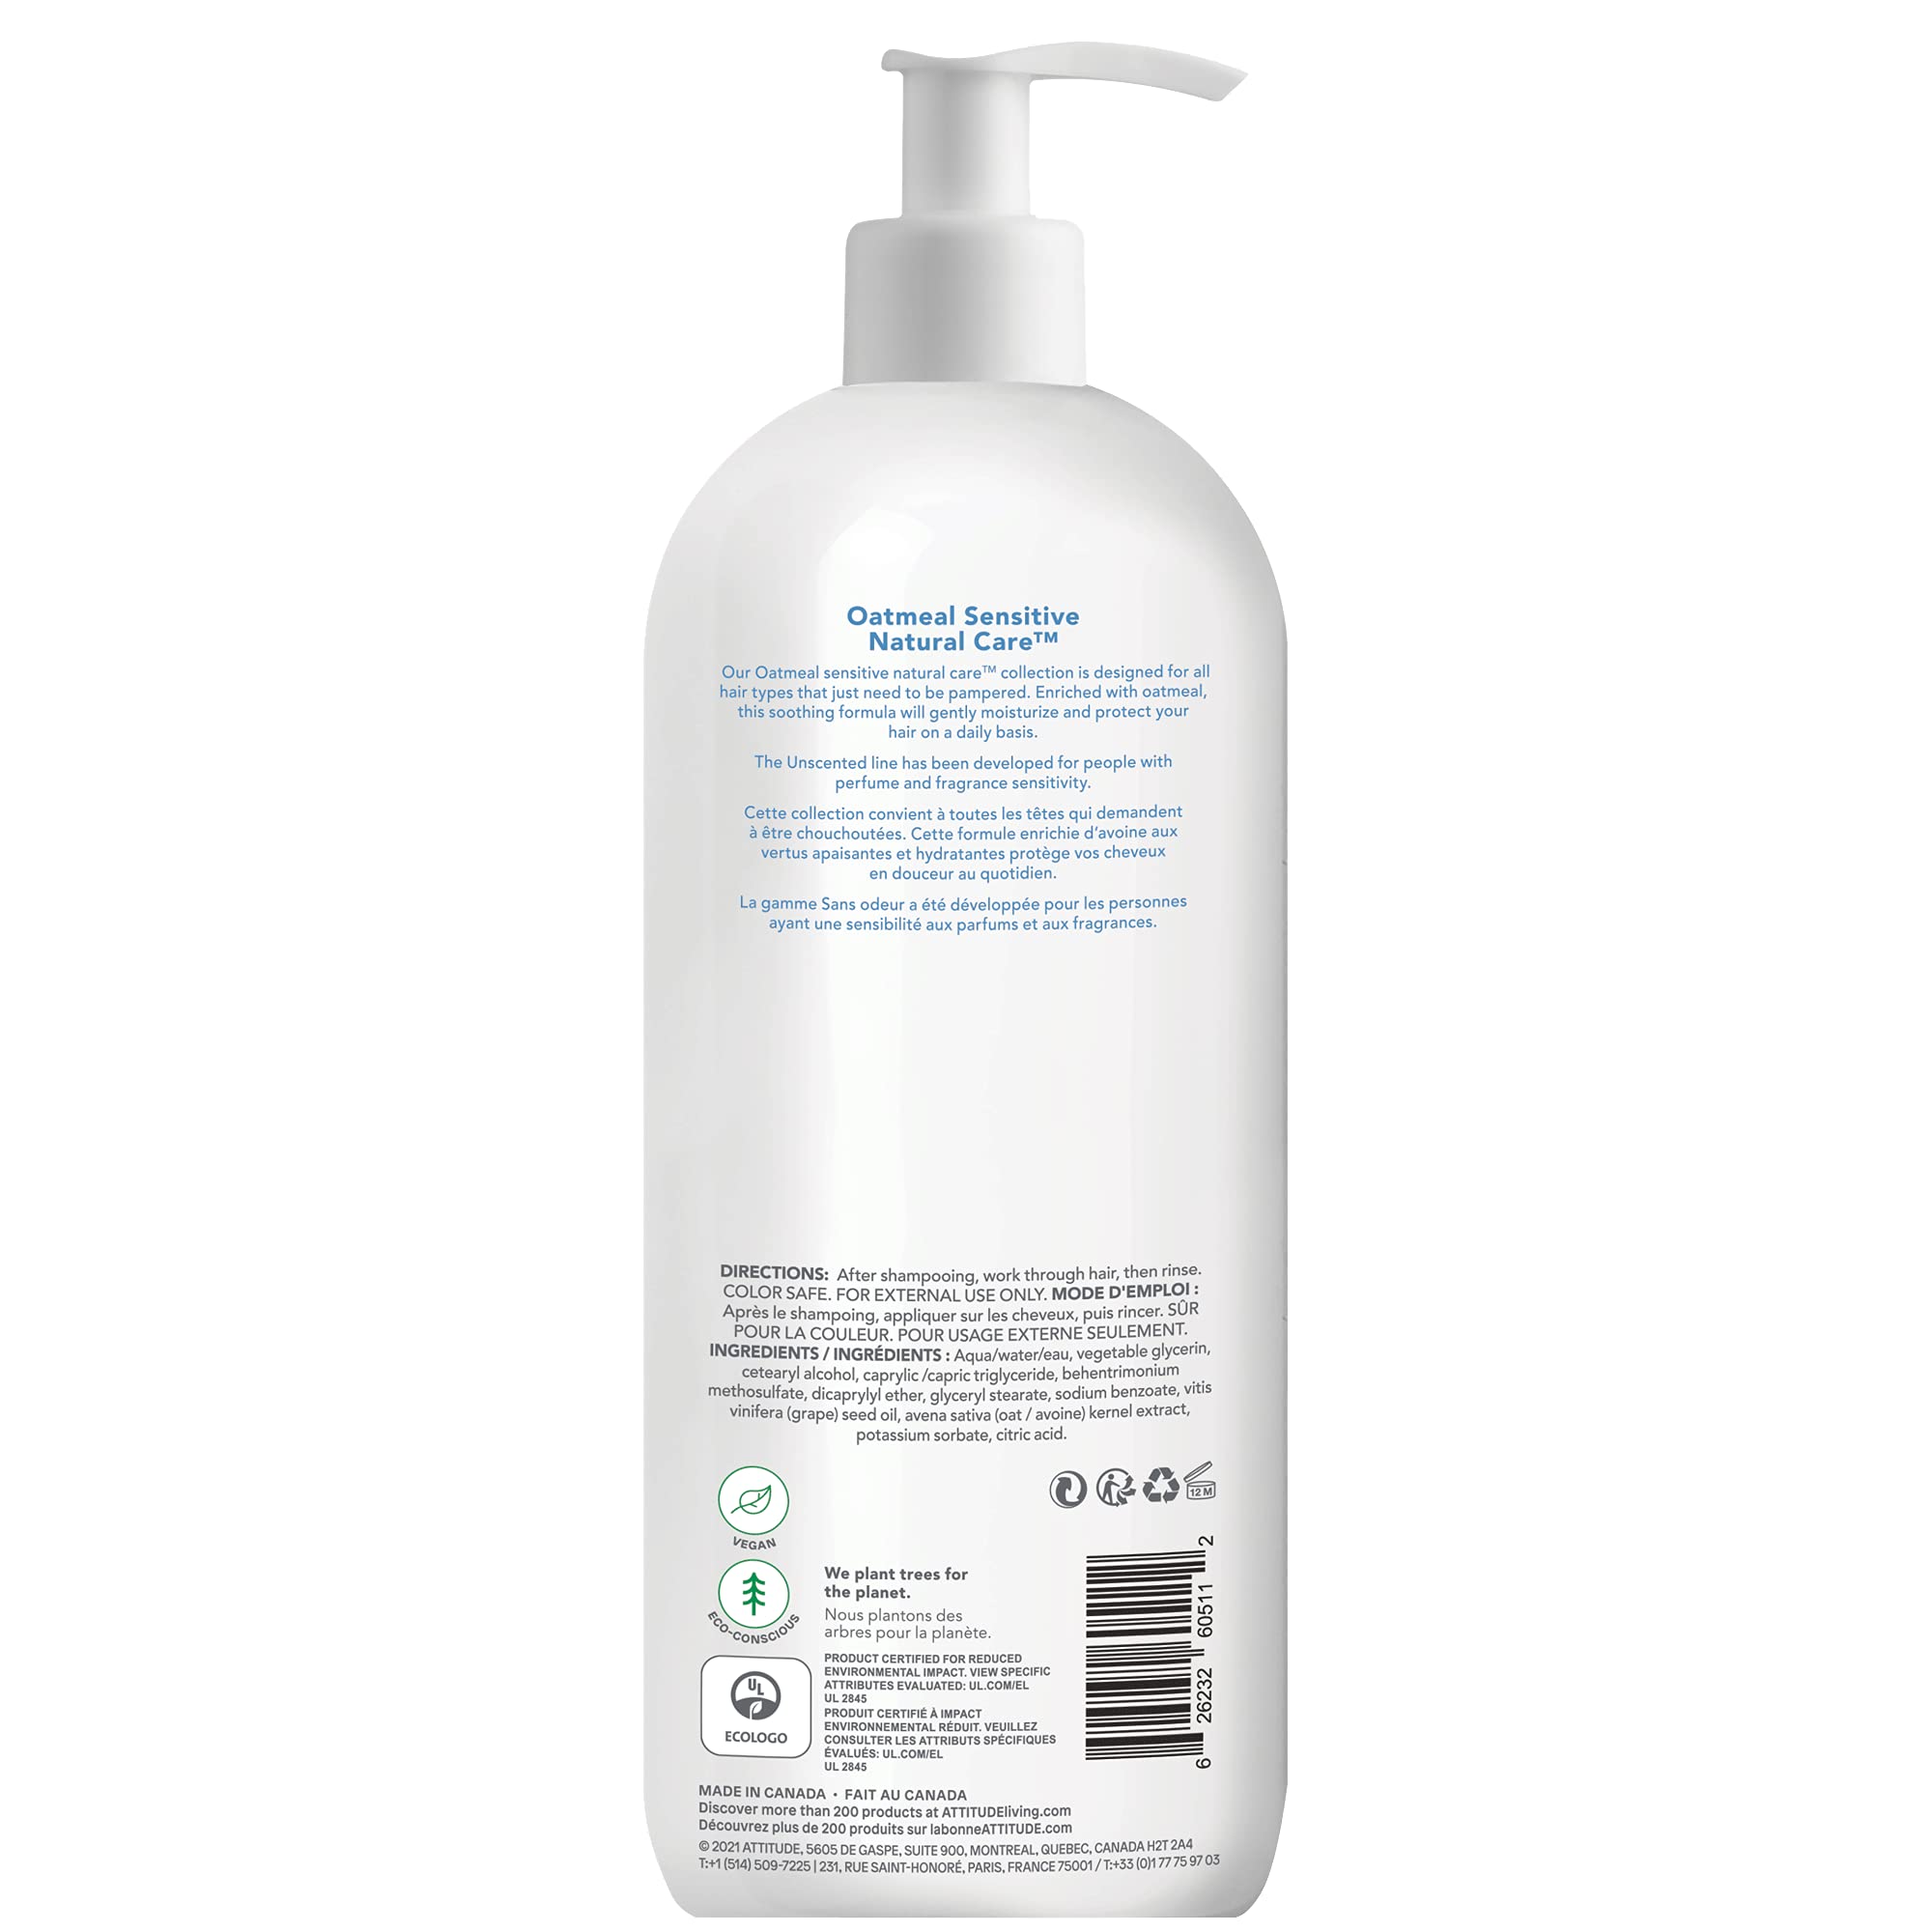 ATTITUDE Extra Gentle and Volumizing Conditioner for Sensitive Skin Enriched with Oat, Hypoallergenic, Vegan and Cruelty-free, Unscented, 32 Fl Oz